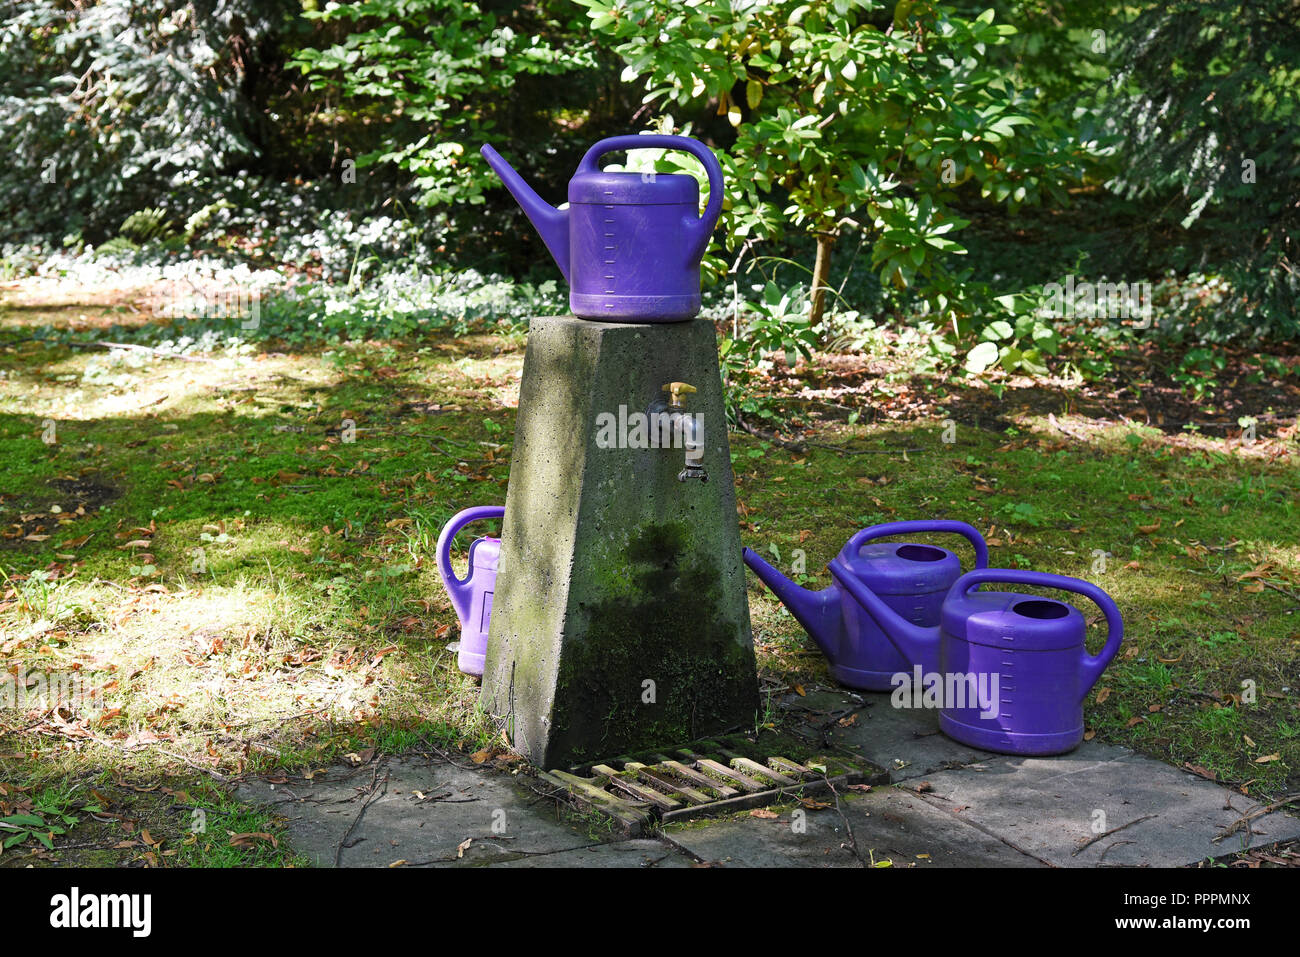 watering cans, watering place, Ostfriedhof, cemetery, Dortmund, Ruhr district, North Rhine-Westphalia, Germany Stock Photo